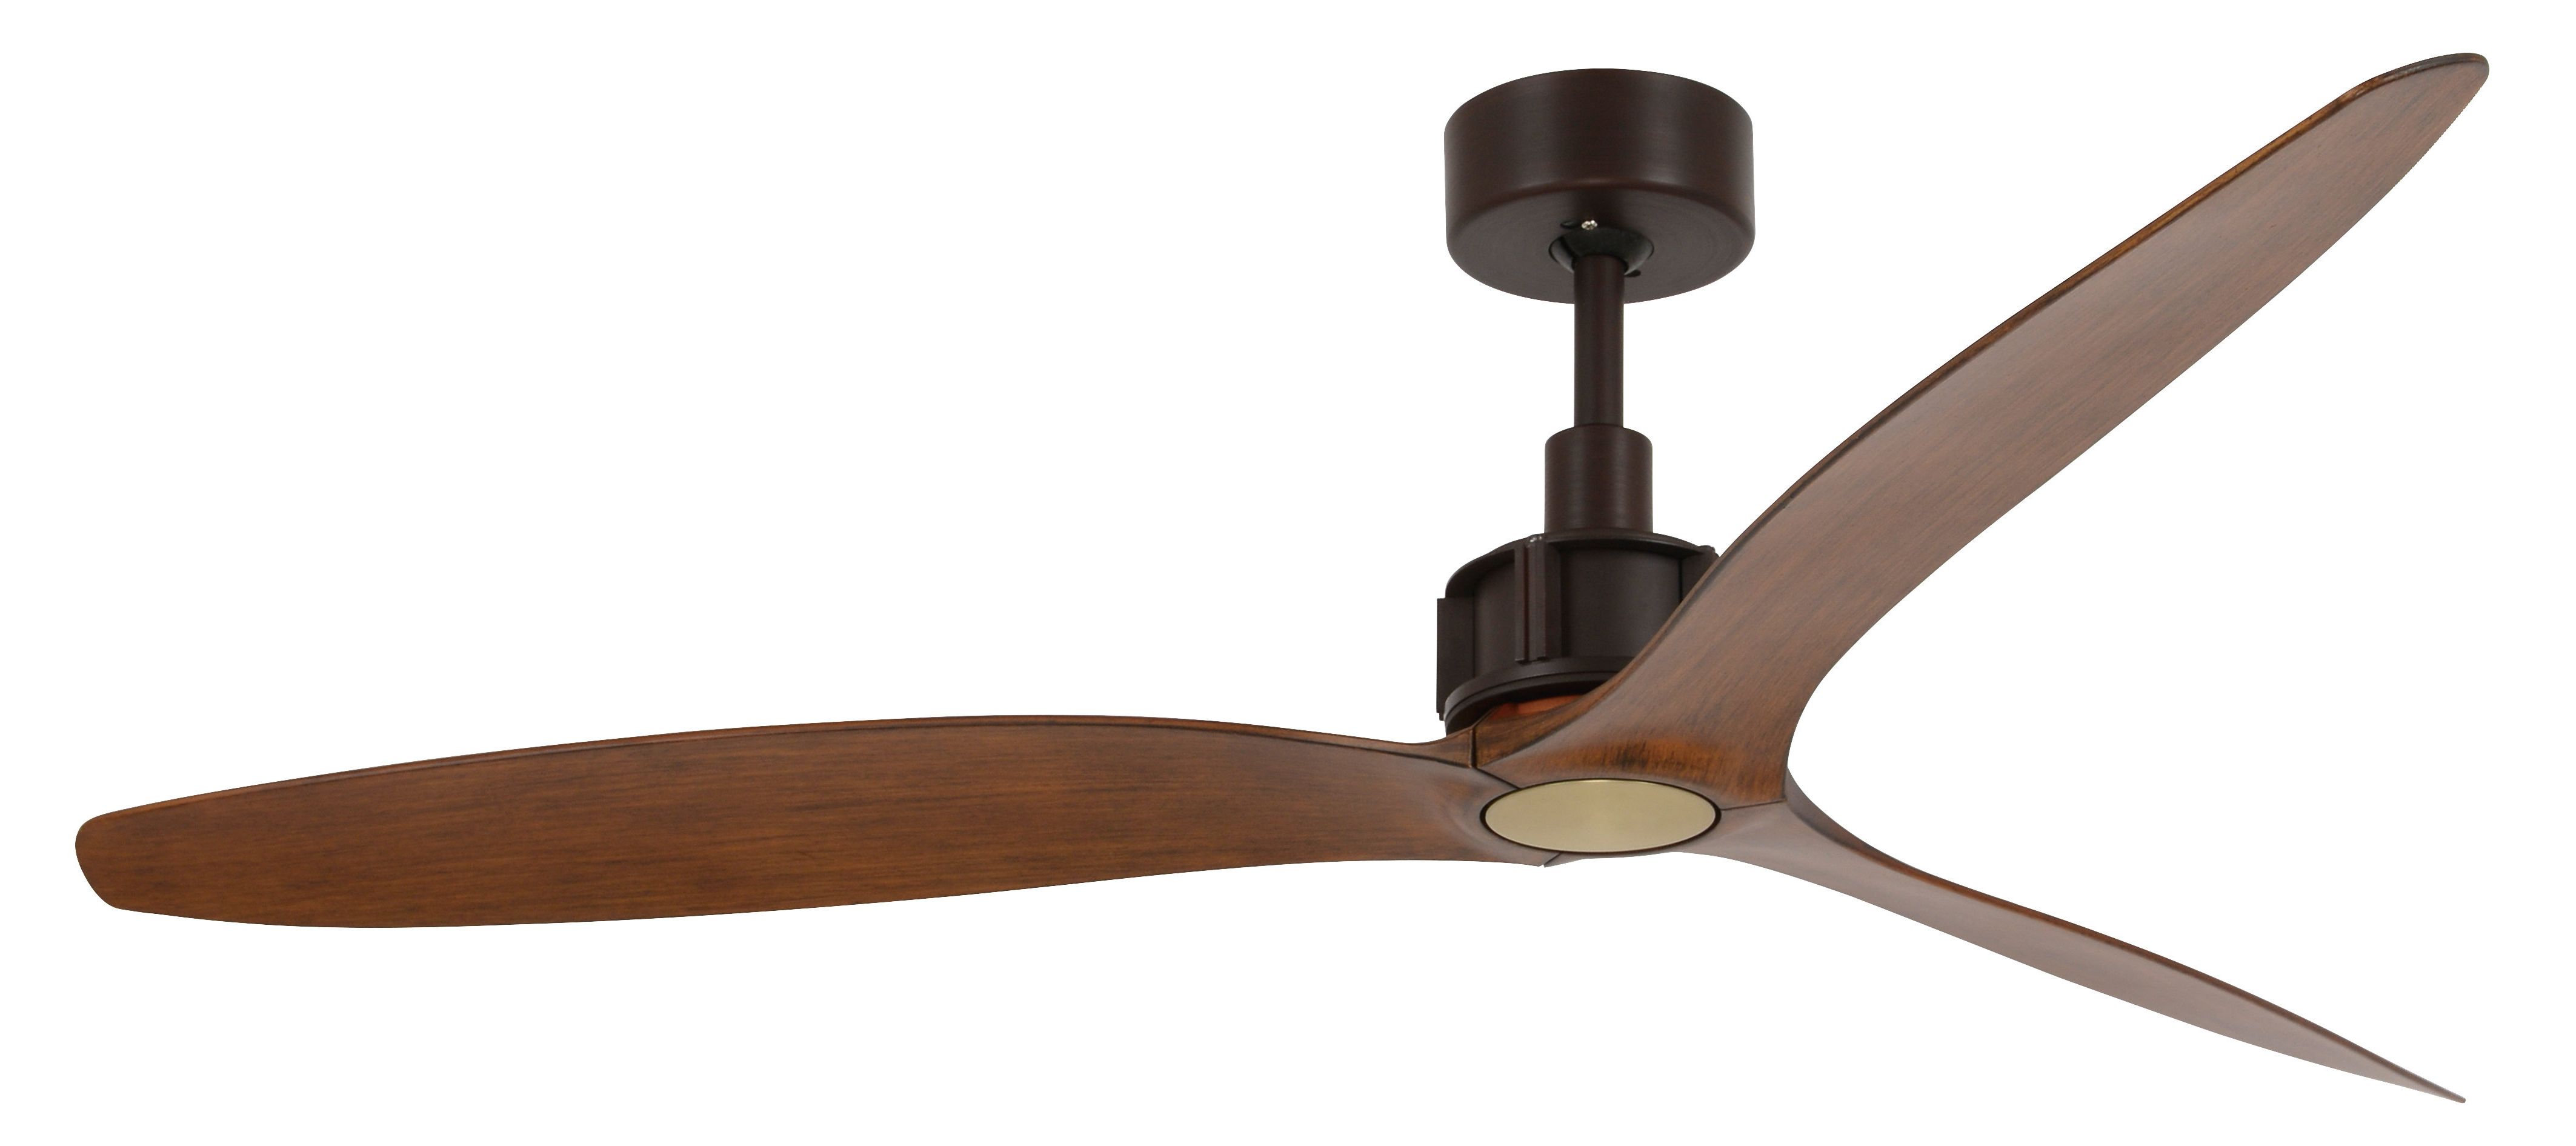 Troxler 3 Blade Ceiling Fans Within 2020 Modern Rustic Interiors Theron 52" Catoe 3 Blade Ceiling Fan With Remote (View 4 of 20)